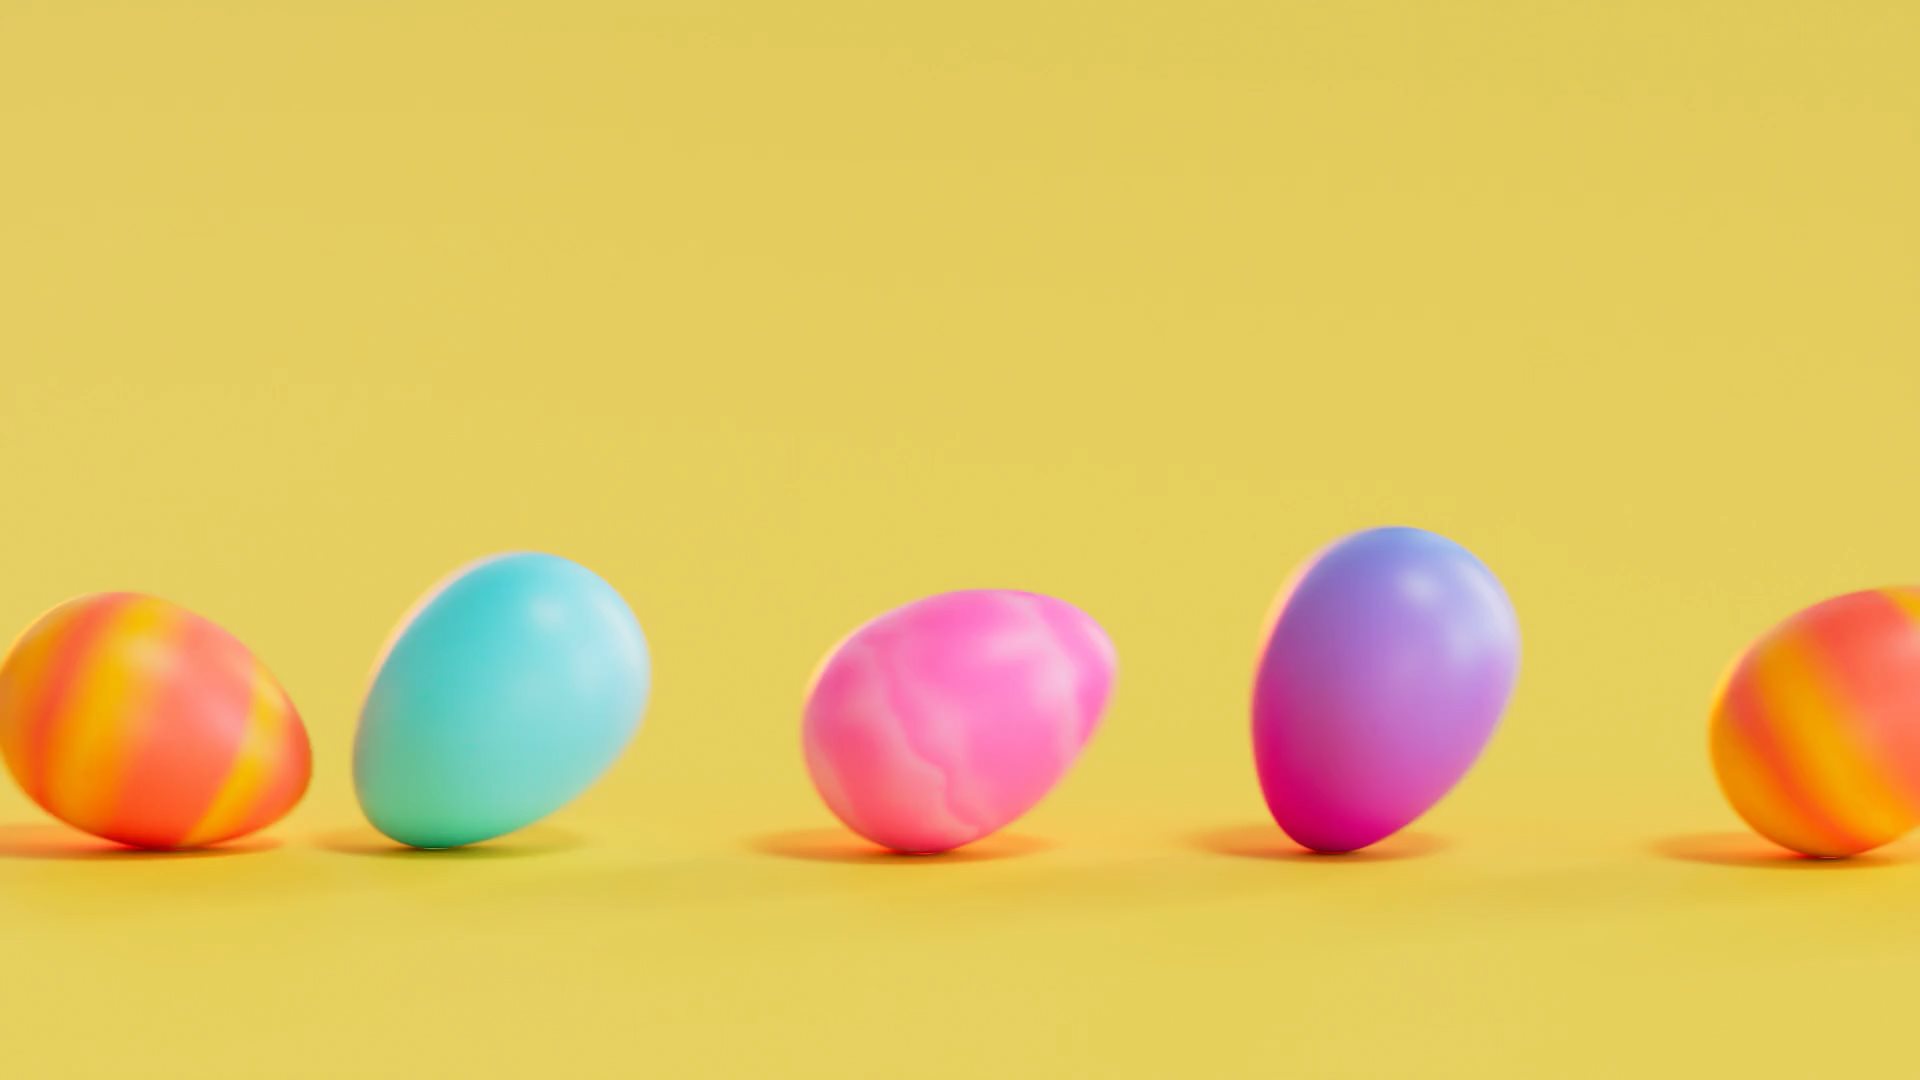 Video of rolling colorful Easter Eggs